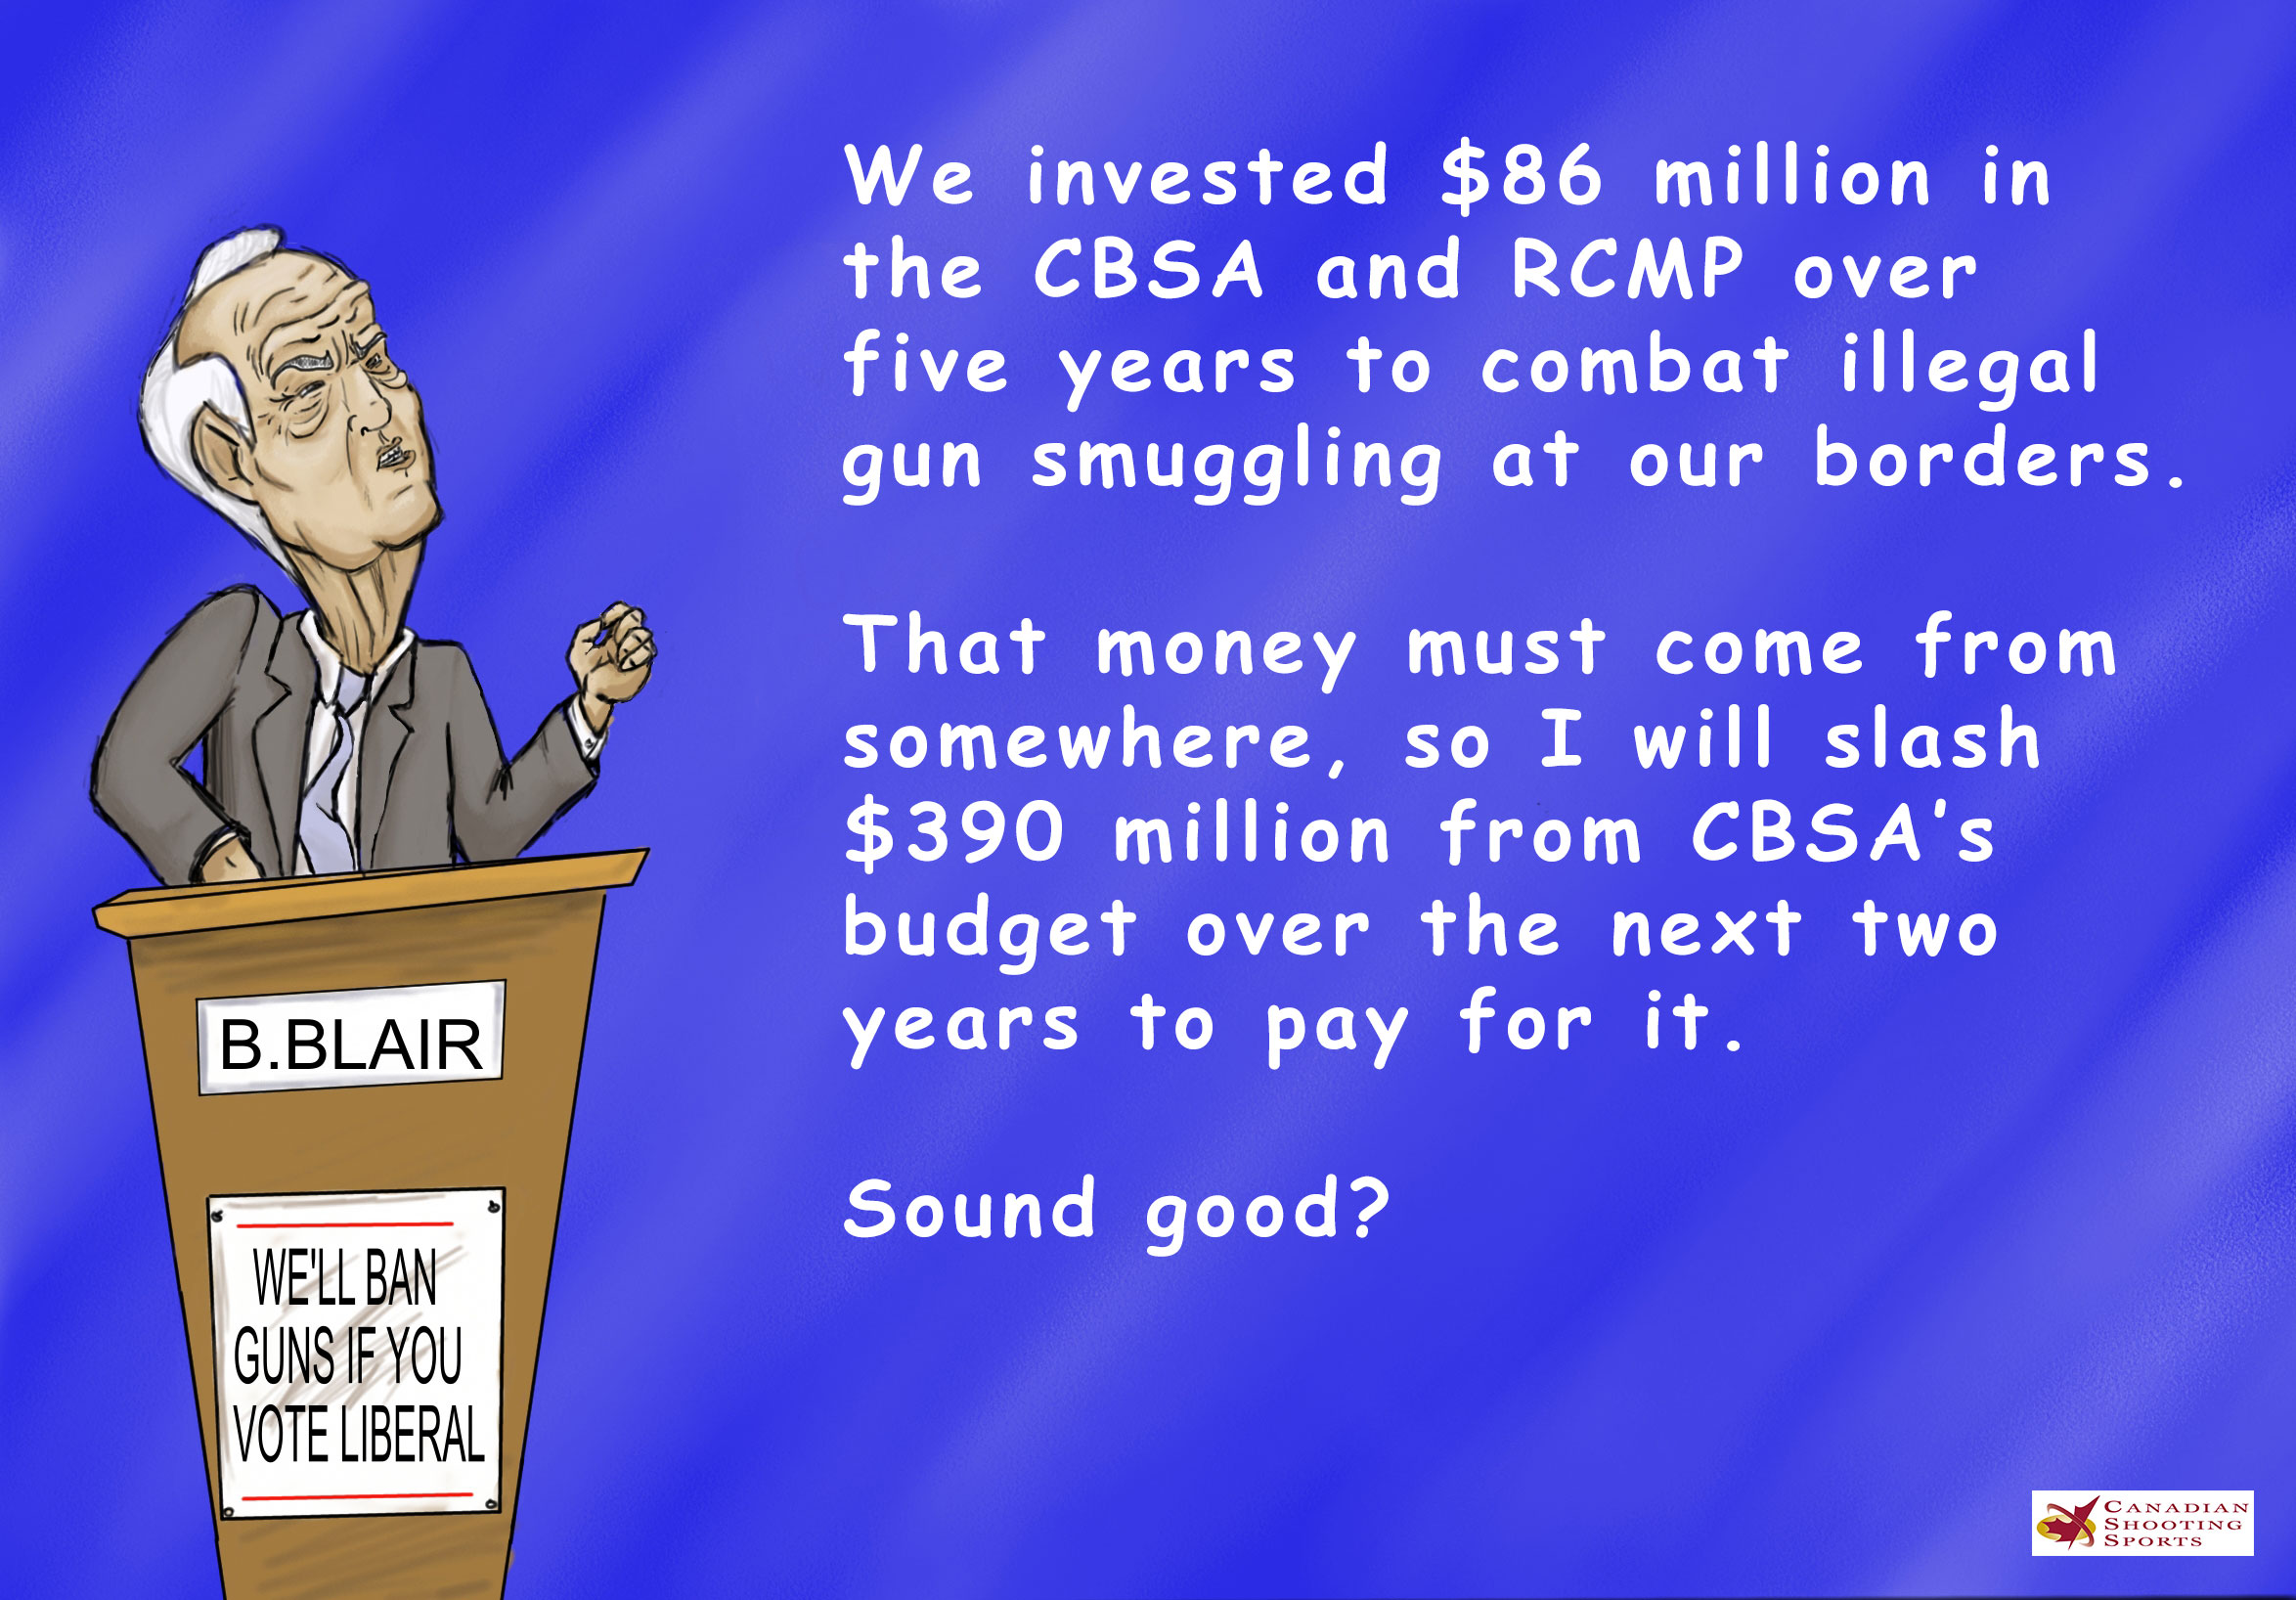 Bill Blair Cuts CBSA Funding, Redefines the Word ‘Invest’